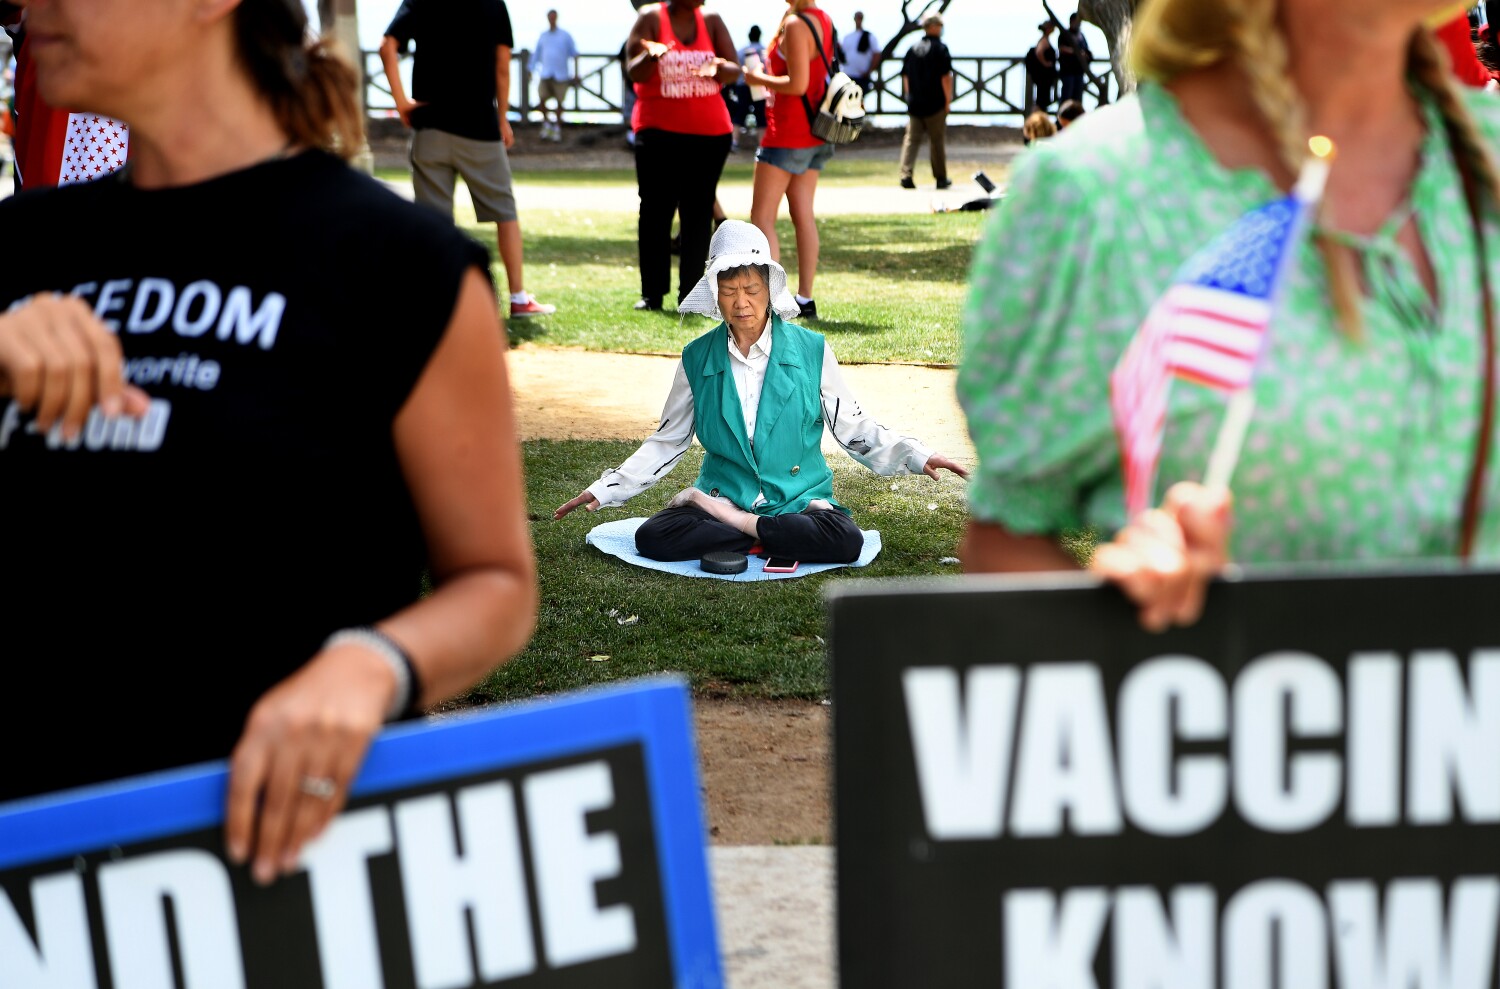 Not all the unvaccinated are diehards, but the 'wait and see' crowd is shrinking